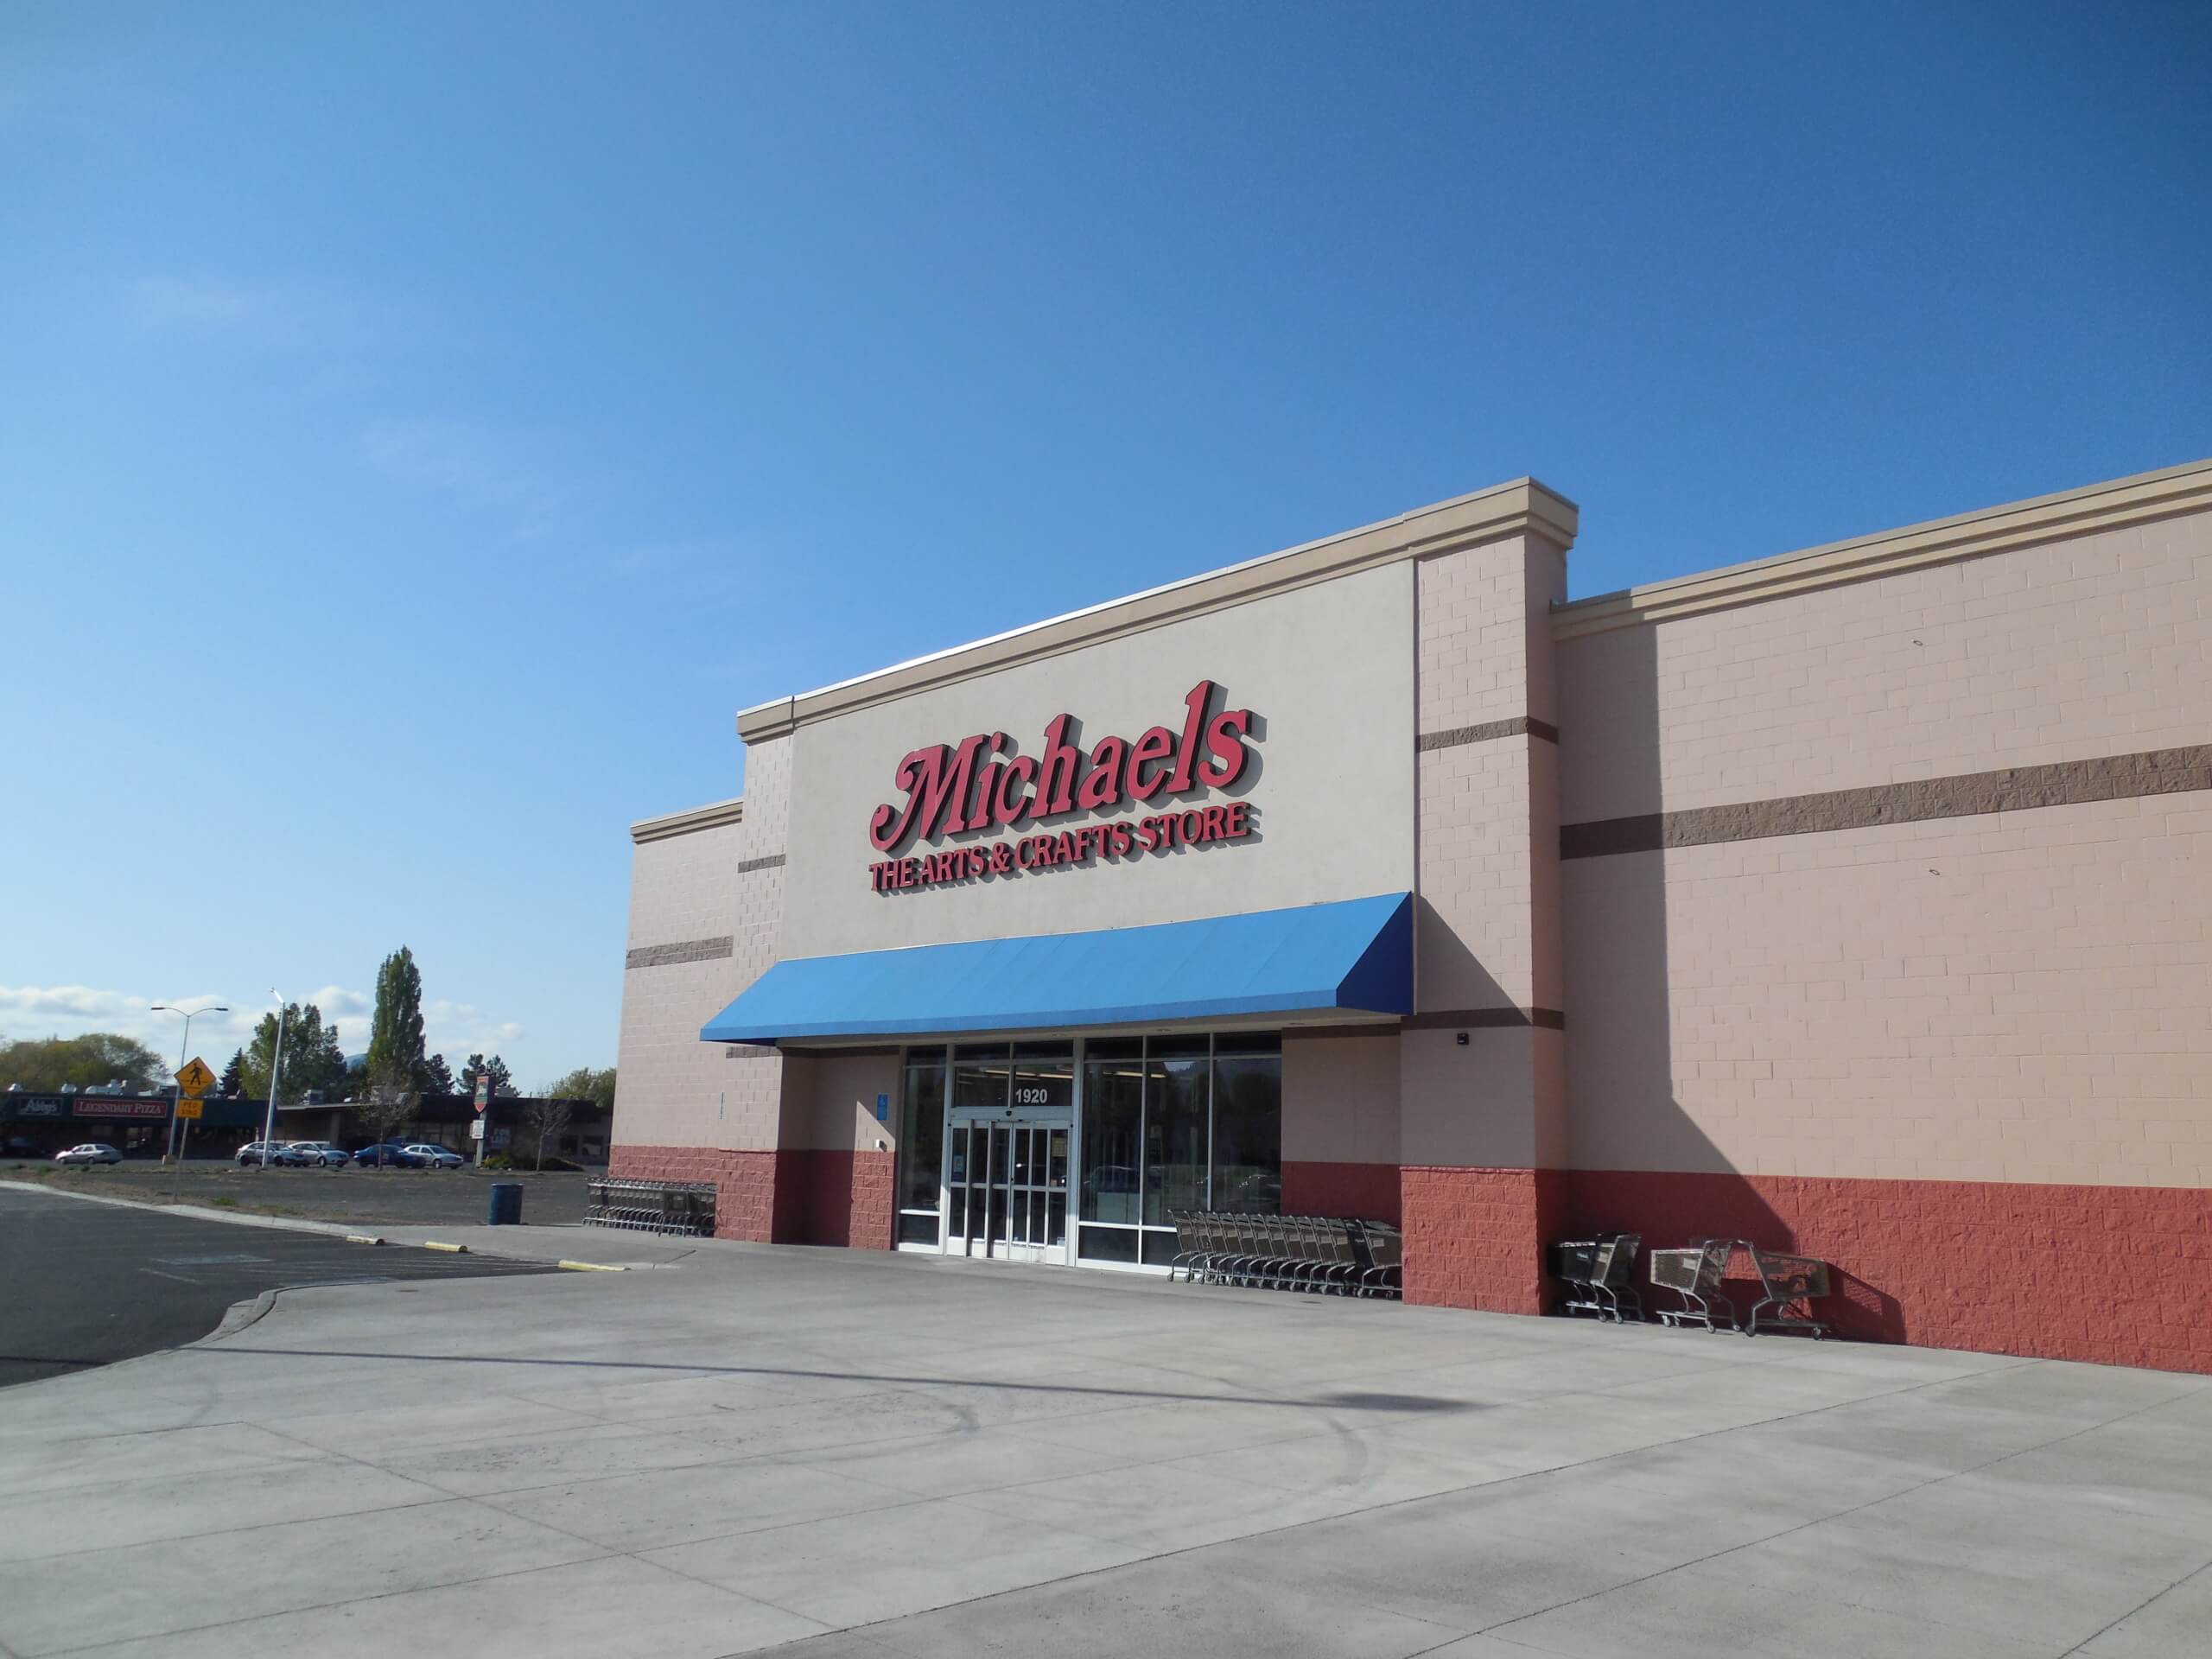 side view of the Michaels Storefront